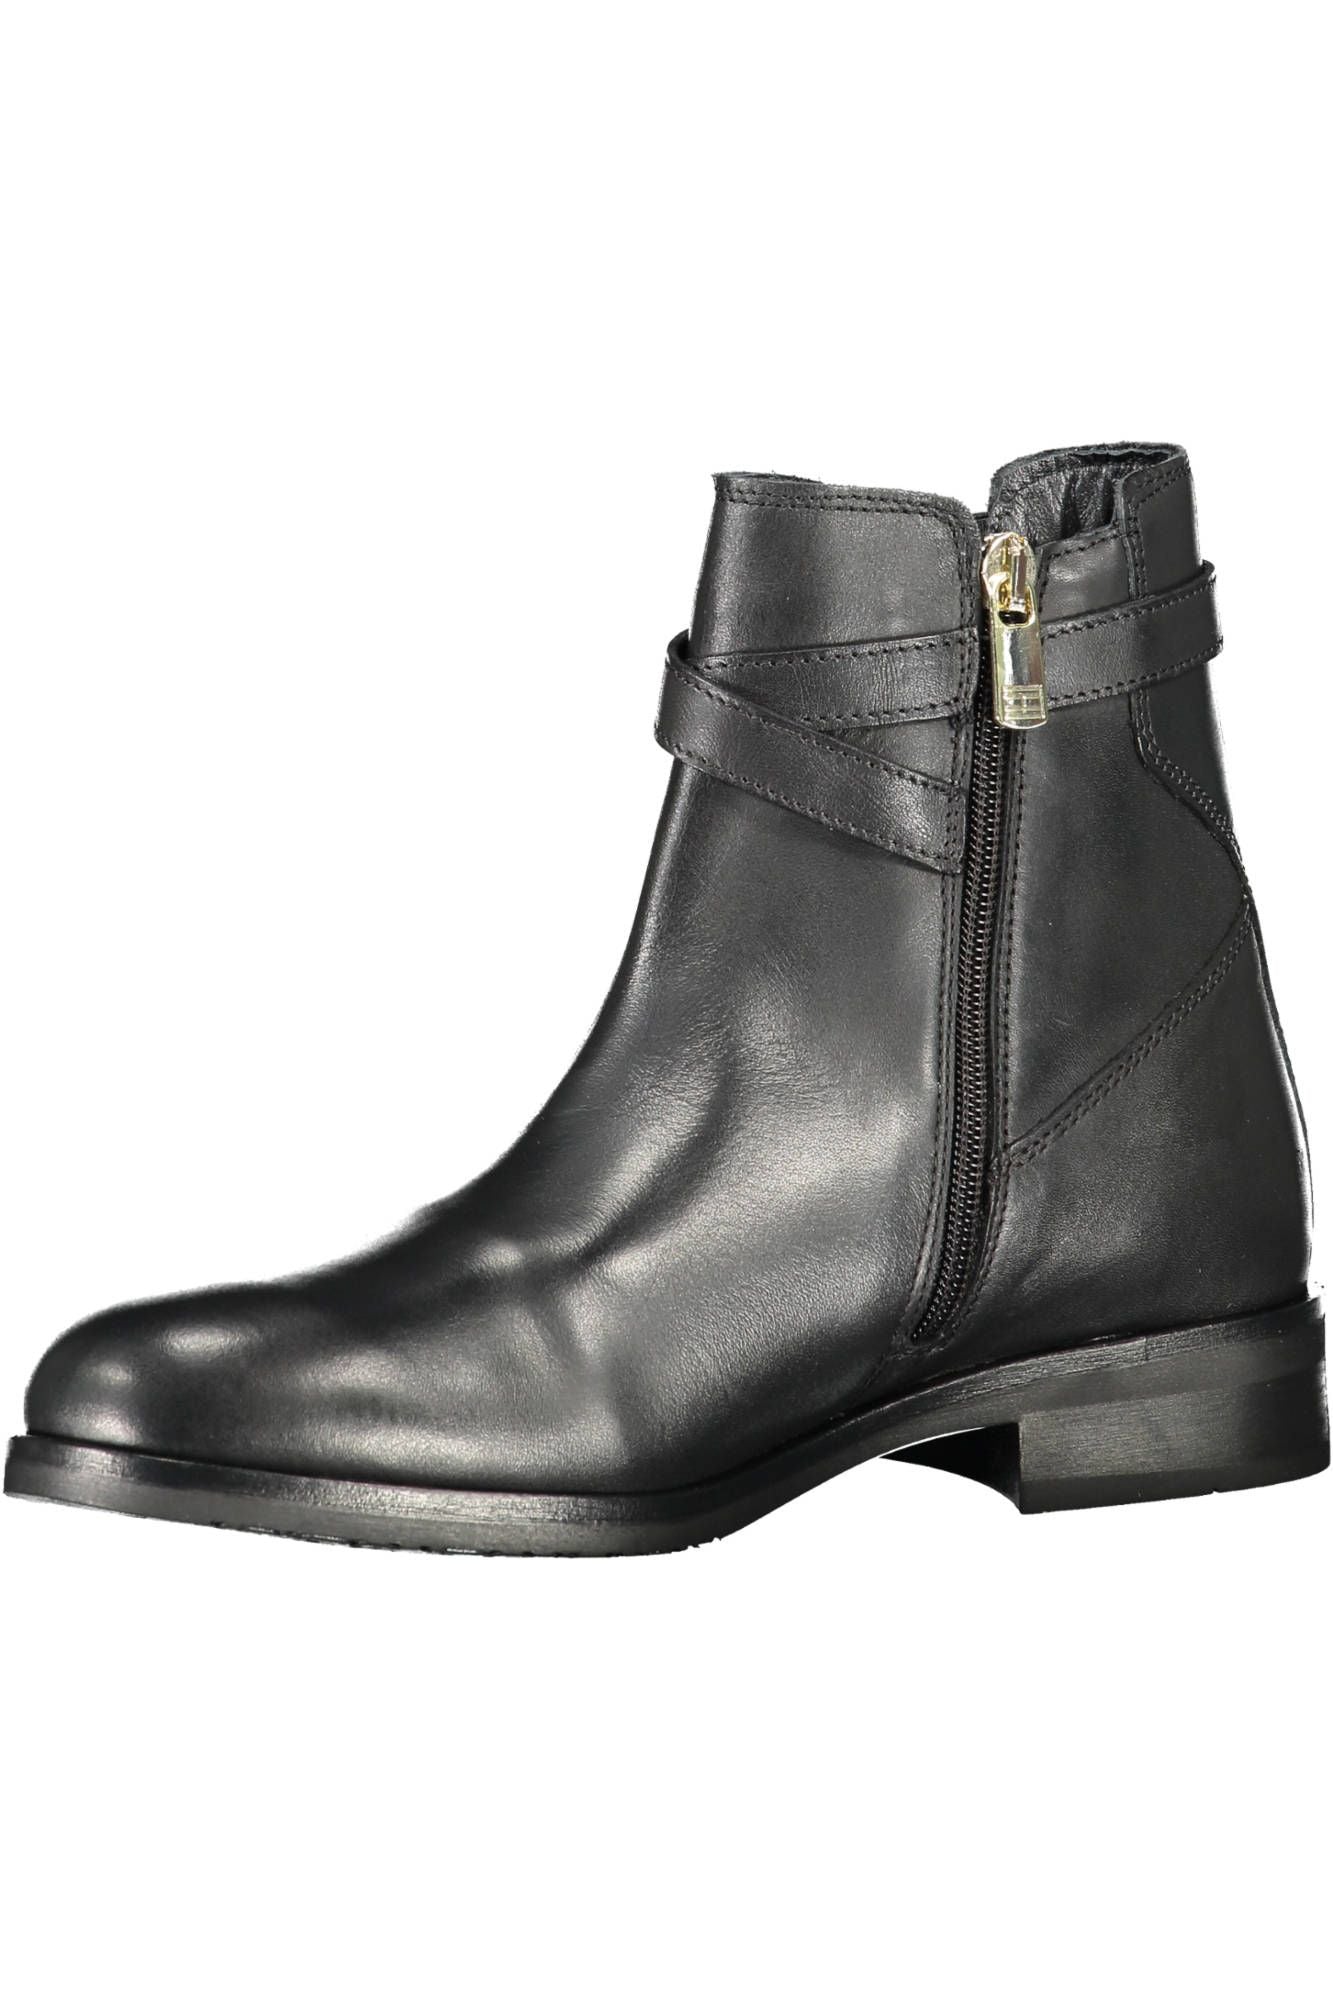 Tommy Hilfiger Chic Black Ankle Boots with Contrasting Zip Detail